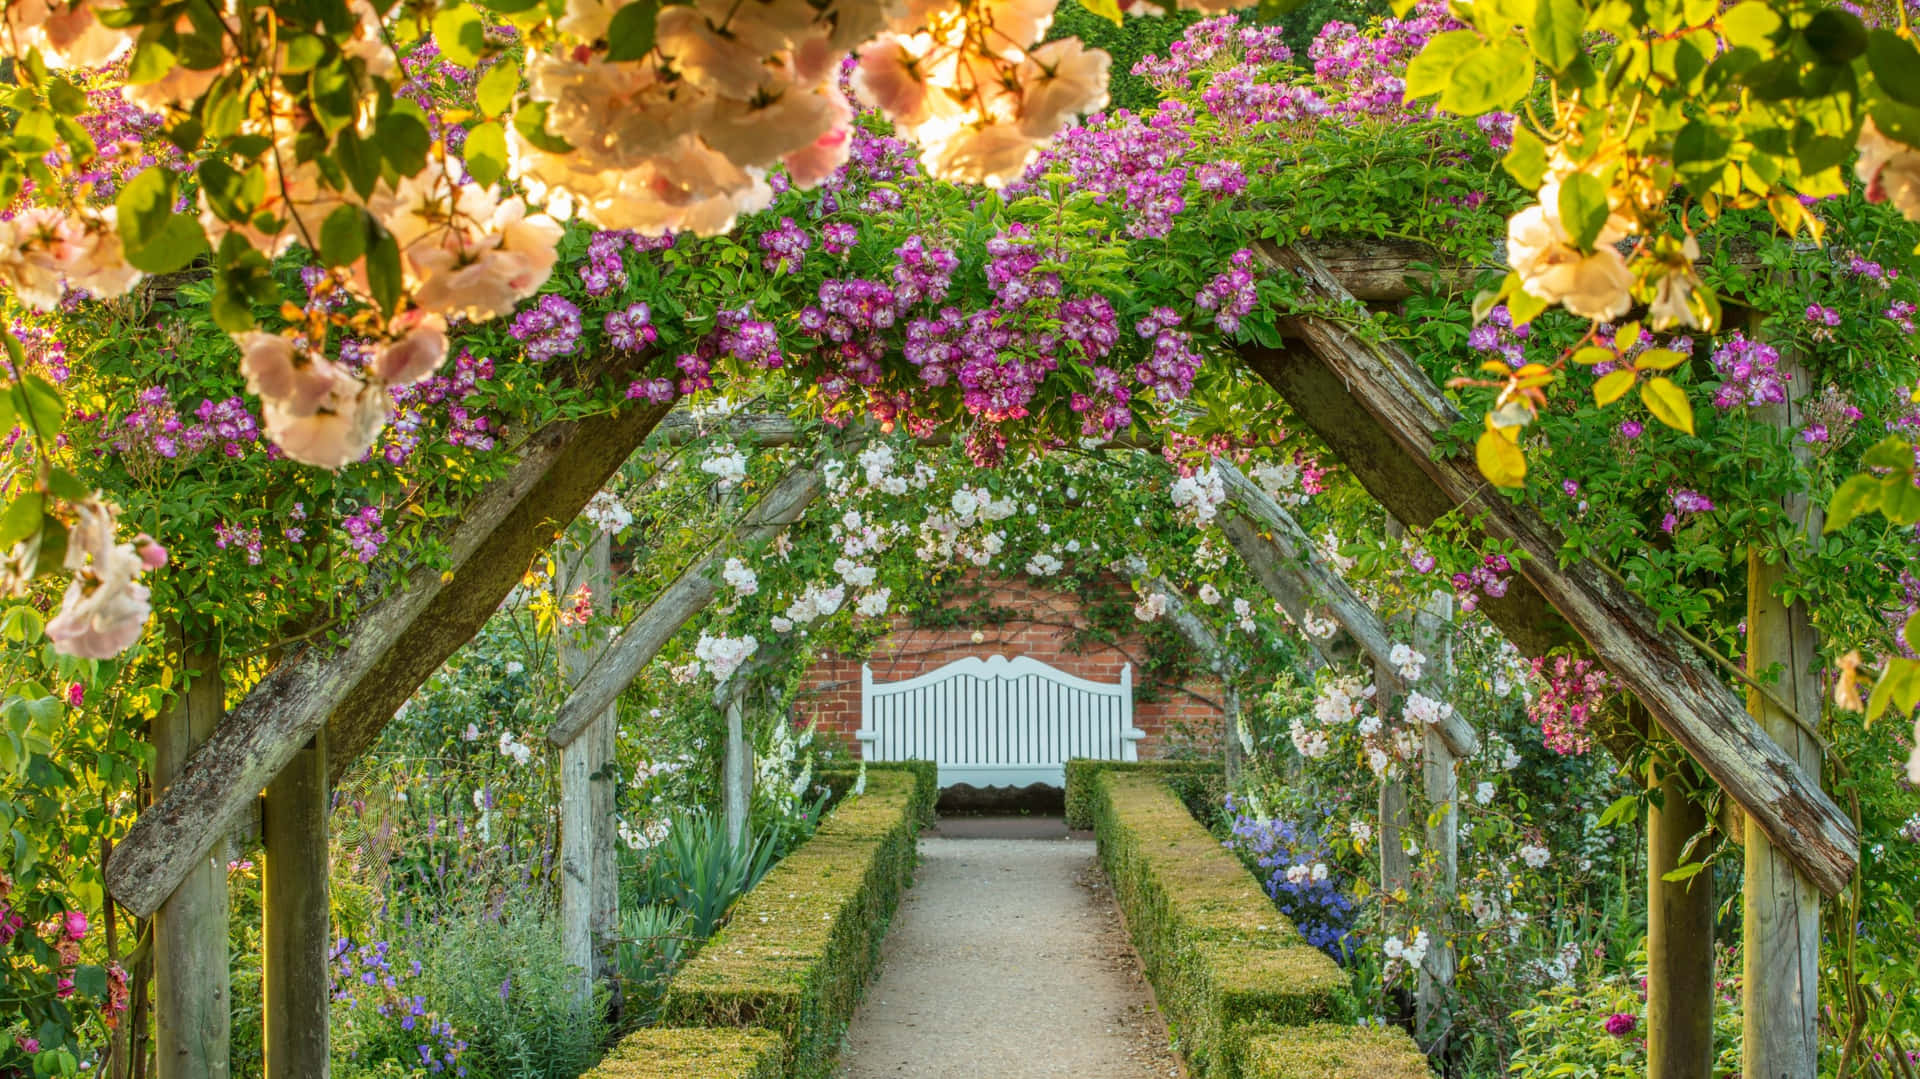 A Pathway With Flowers And A Wooden Archway